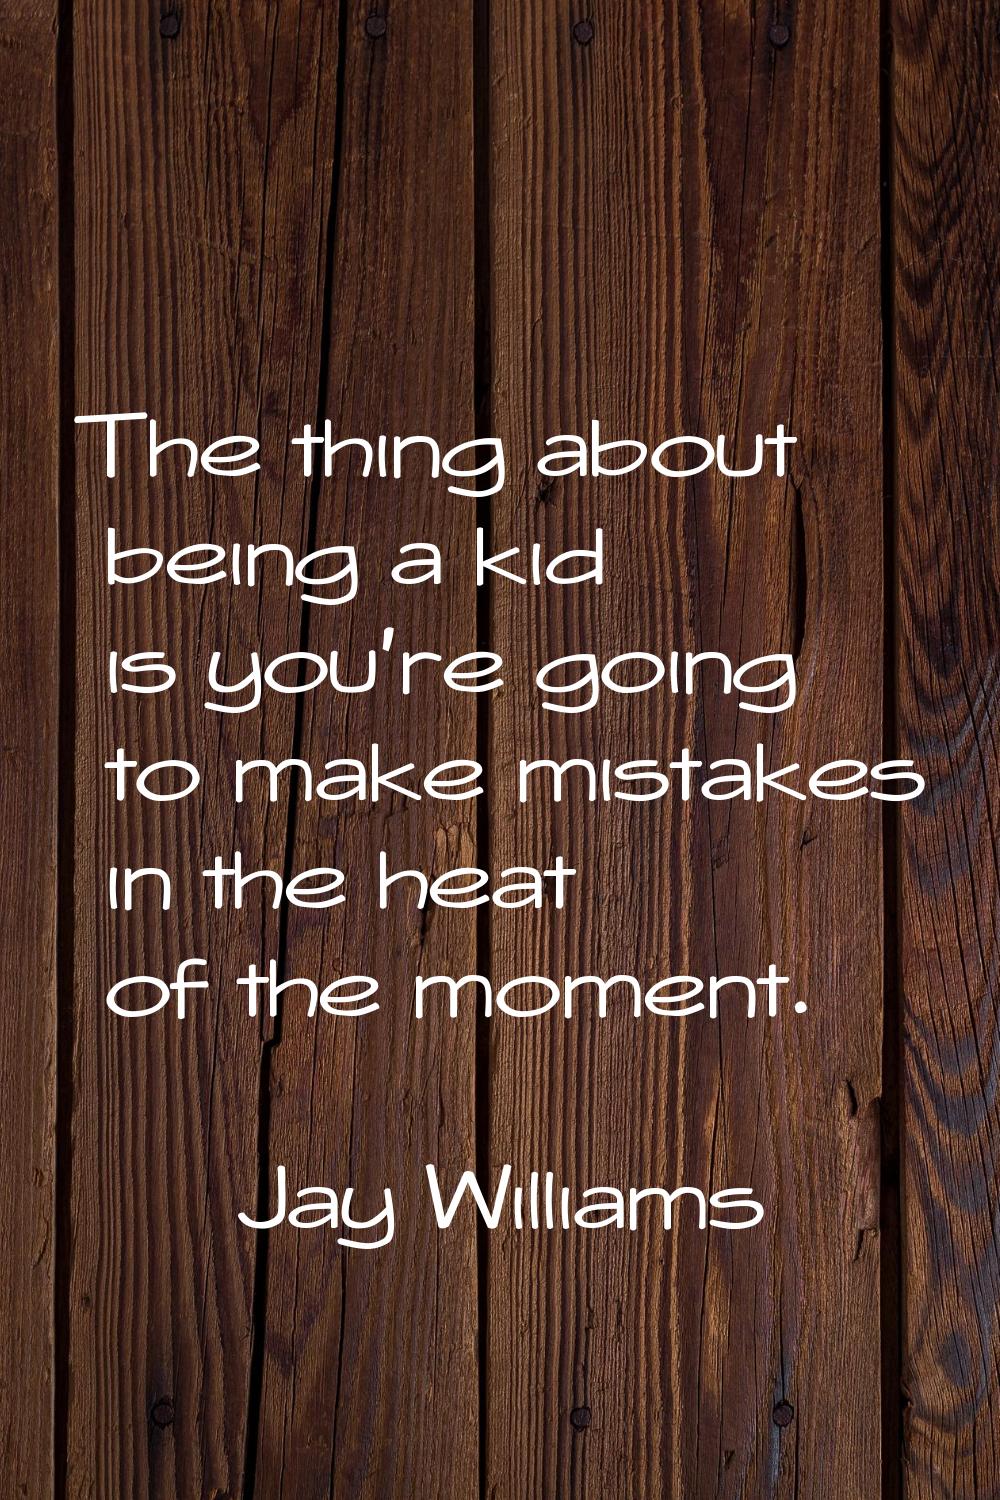 The thing about being a kid is you're going to make mistakes in the heat of the moment.